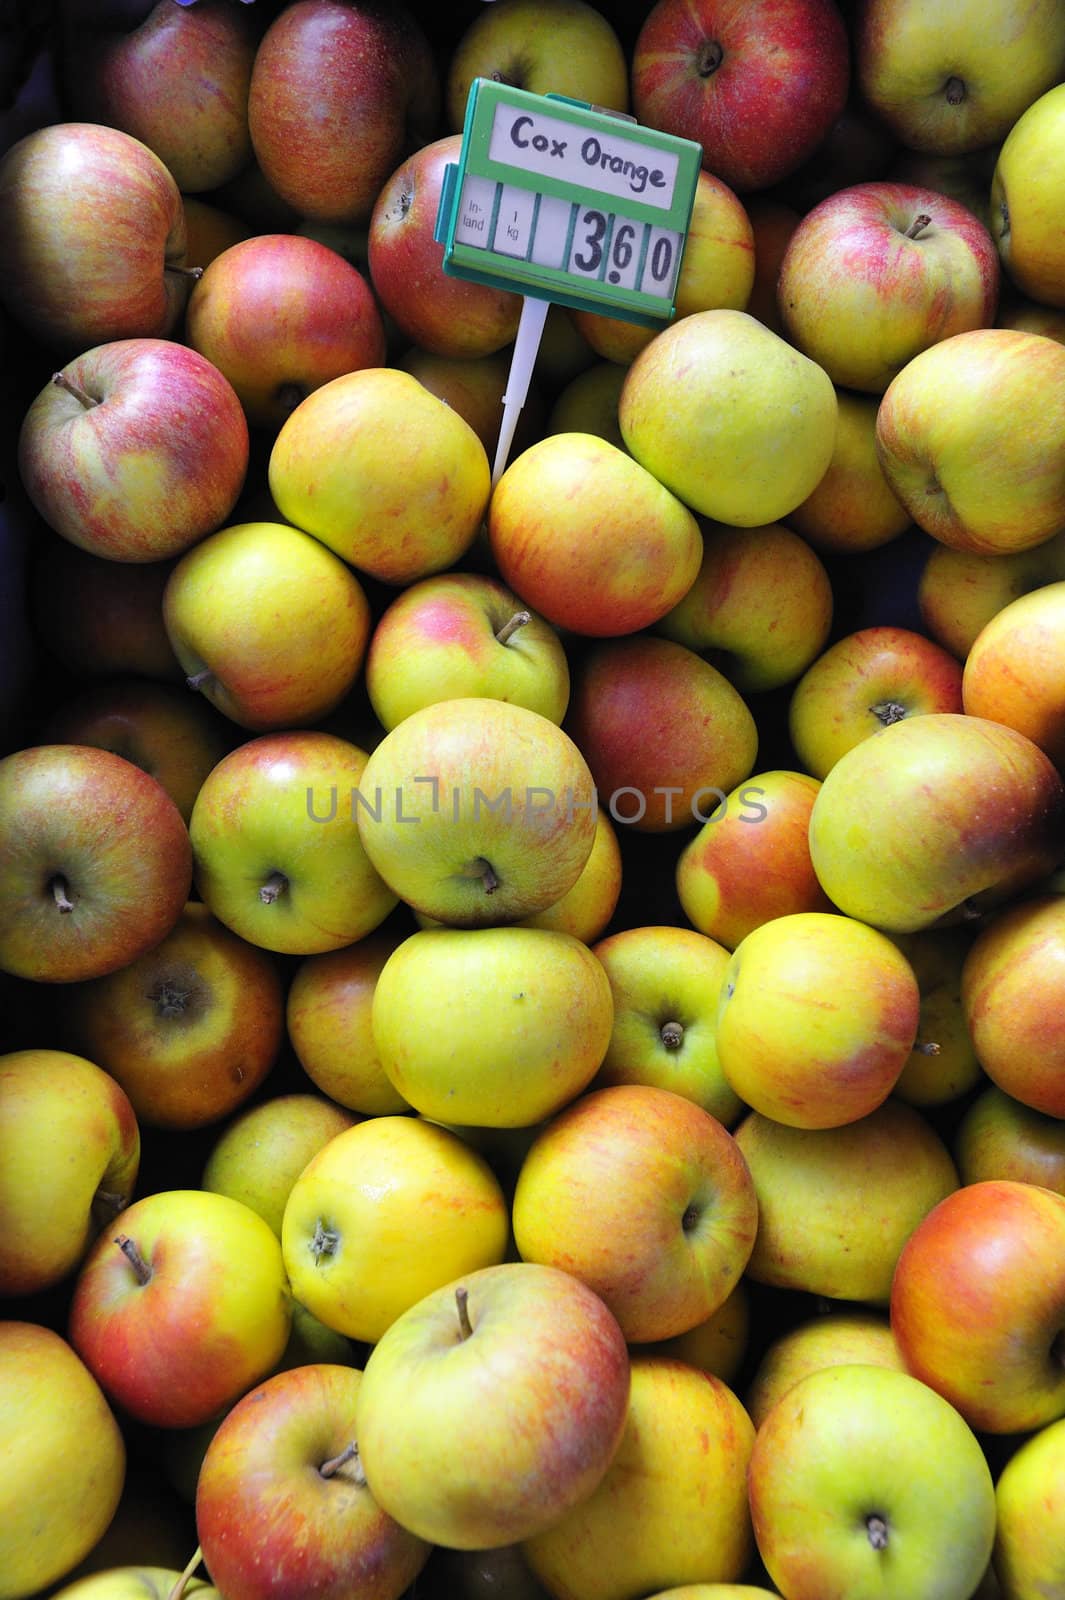 Cox's Orange Pippin apples for sale on a market stall, with the price tag